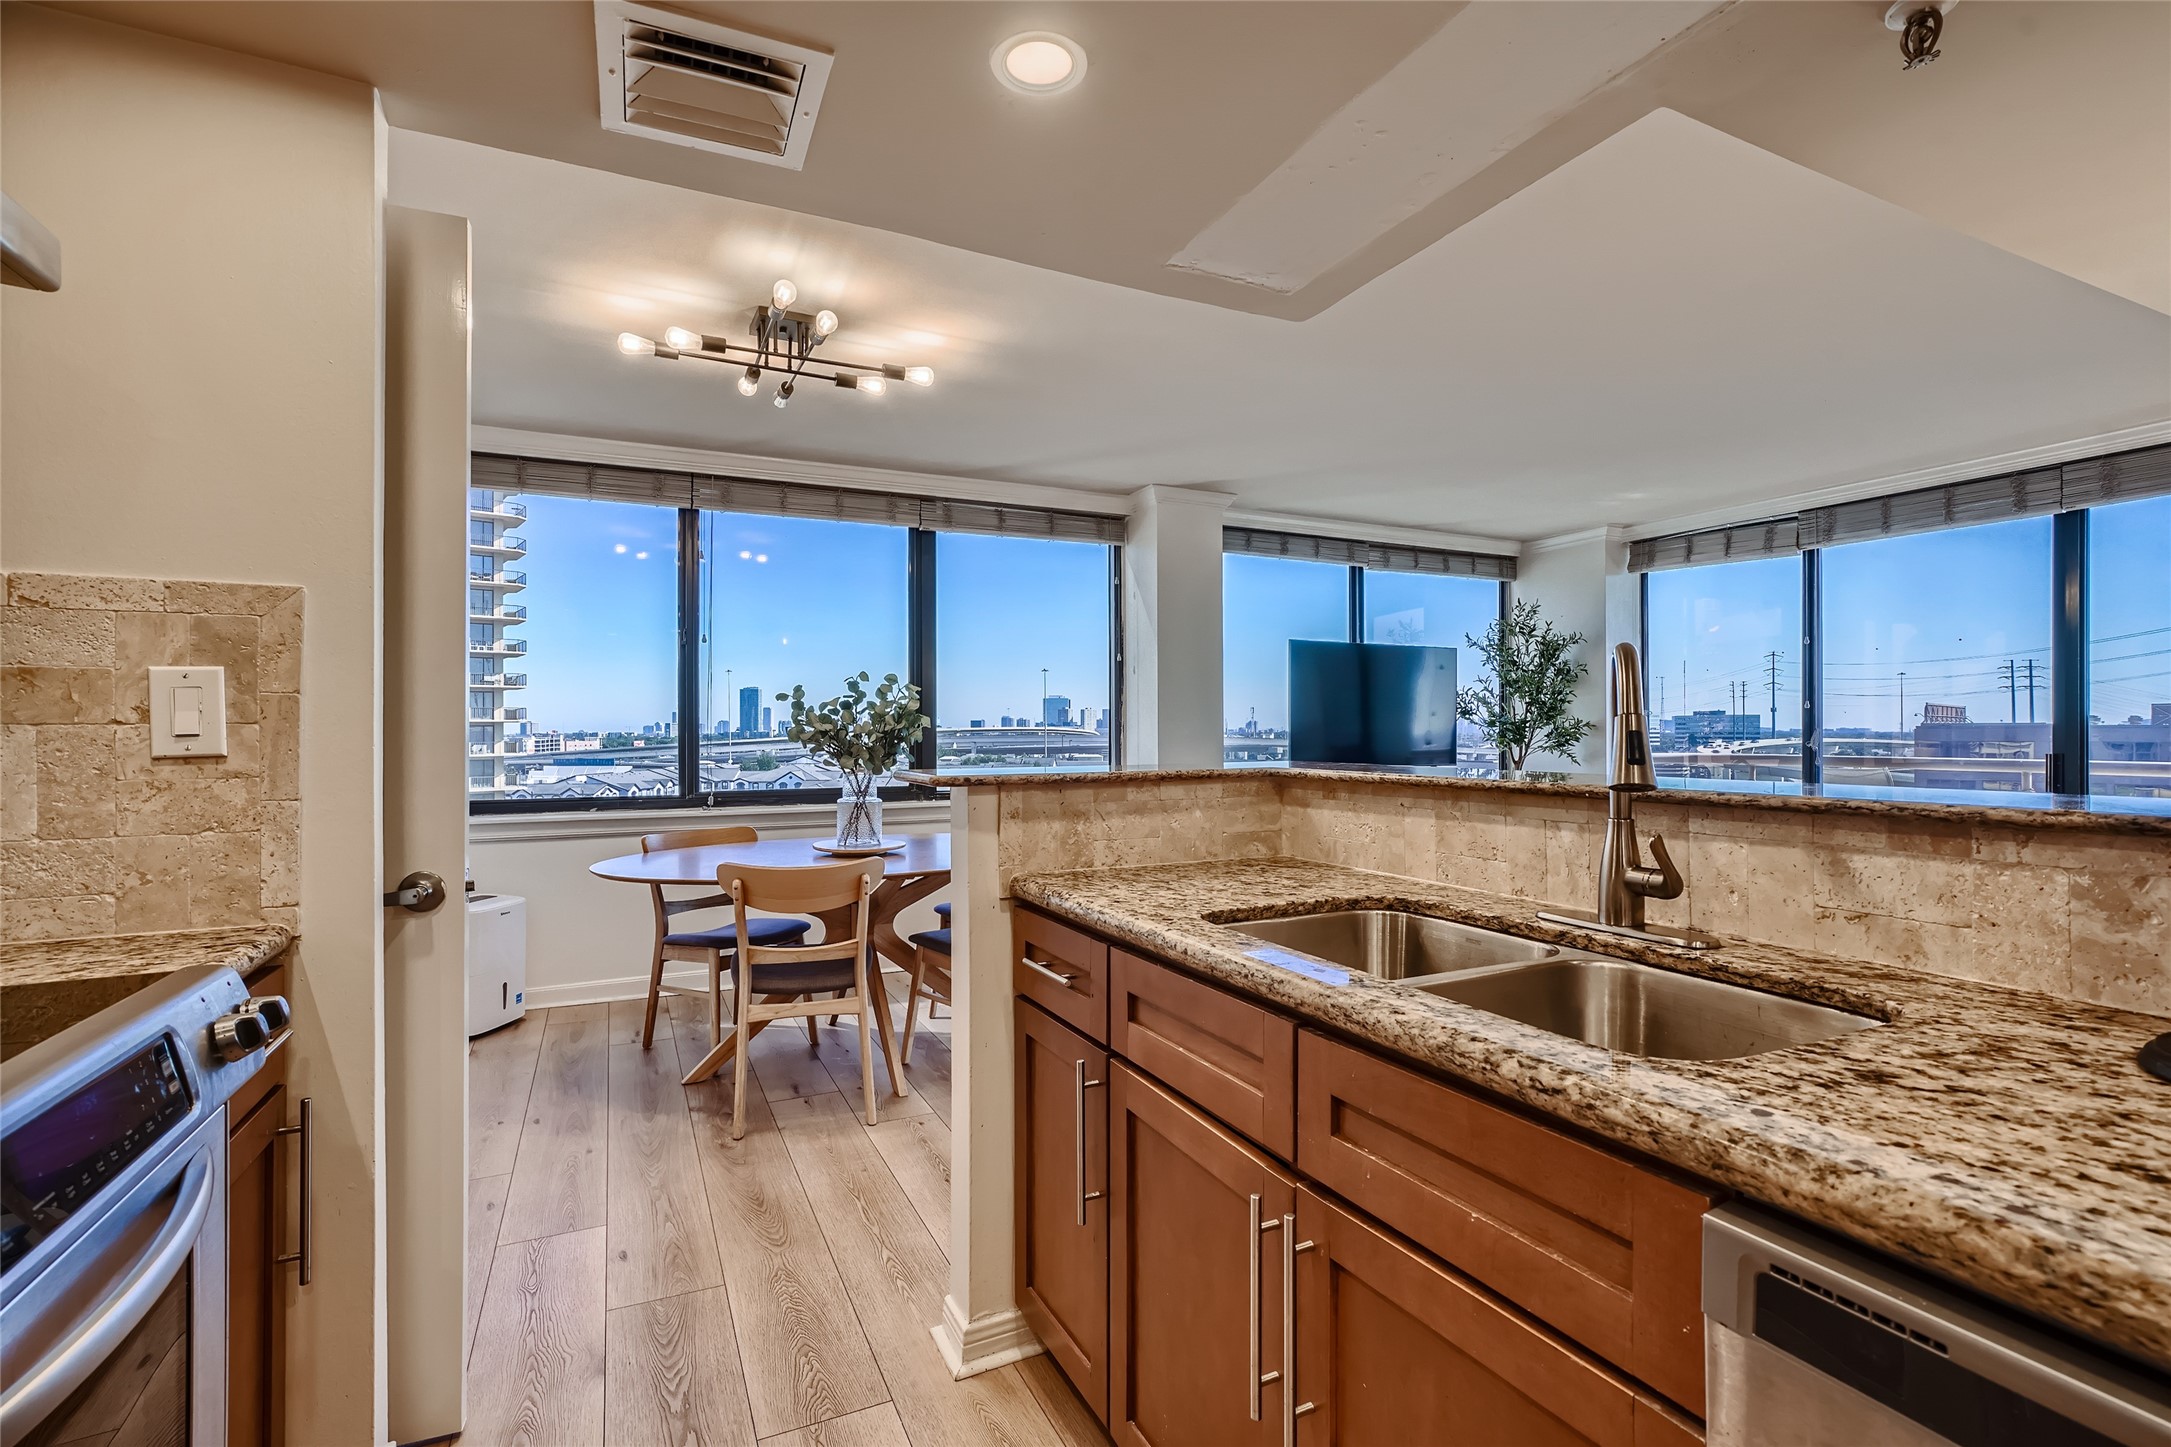 Indulge in the stunning views as you prepare meals in this kitchen, whether it's during a sunrise or at dusk.